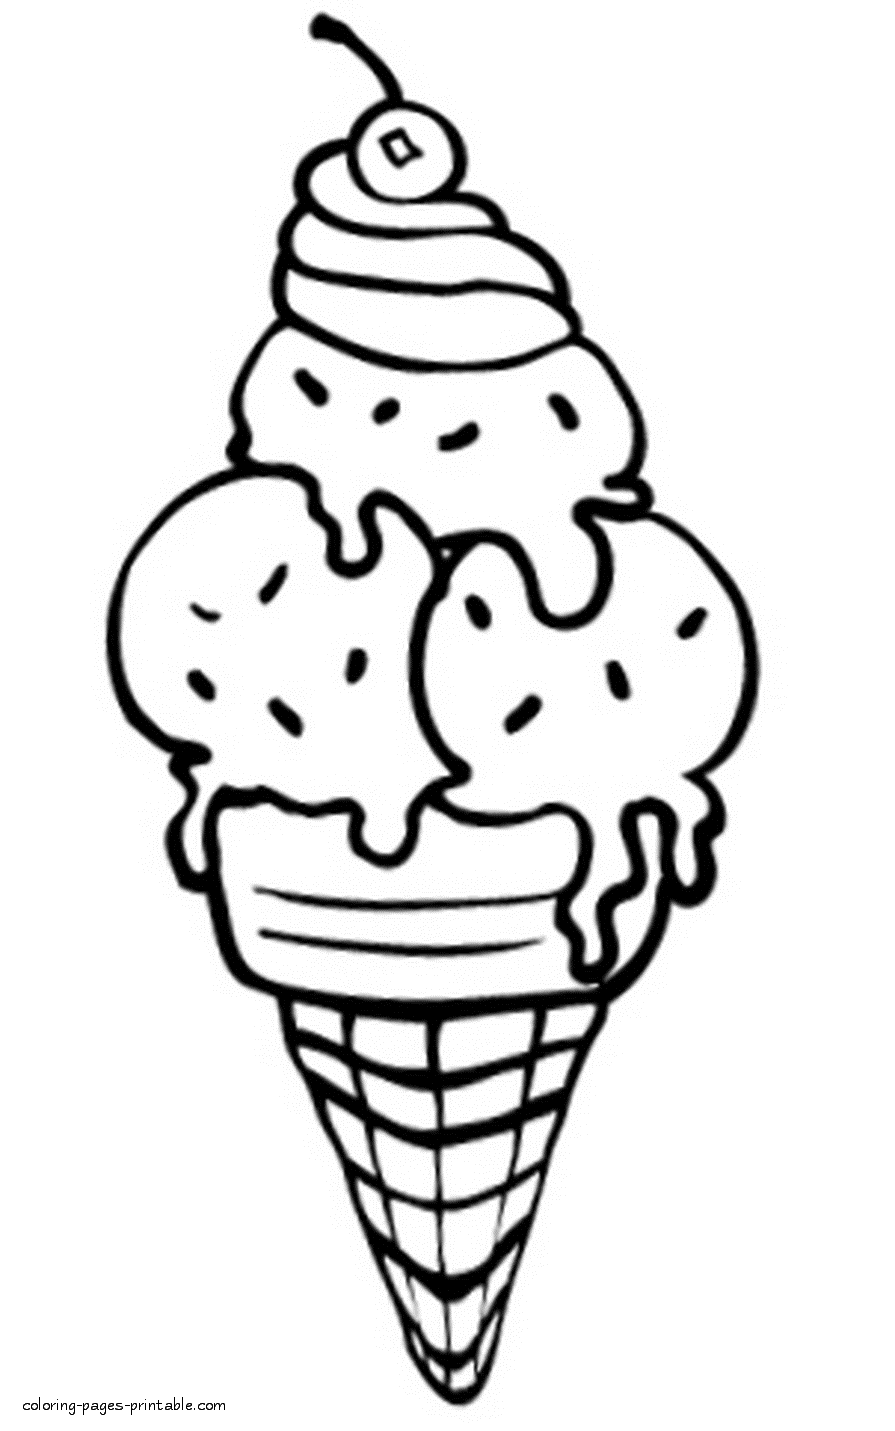 beautiful-ice-cream-coloring-page-coloring-pages-printable-com